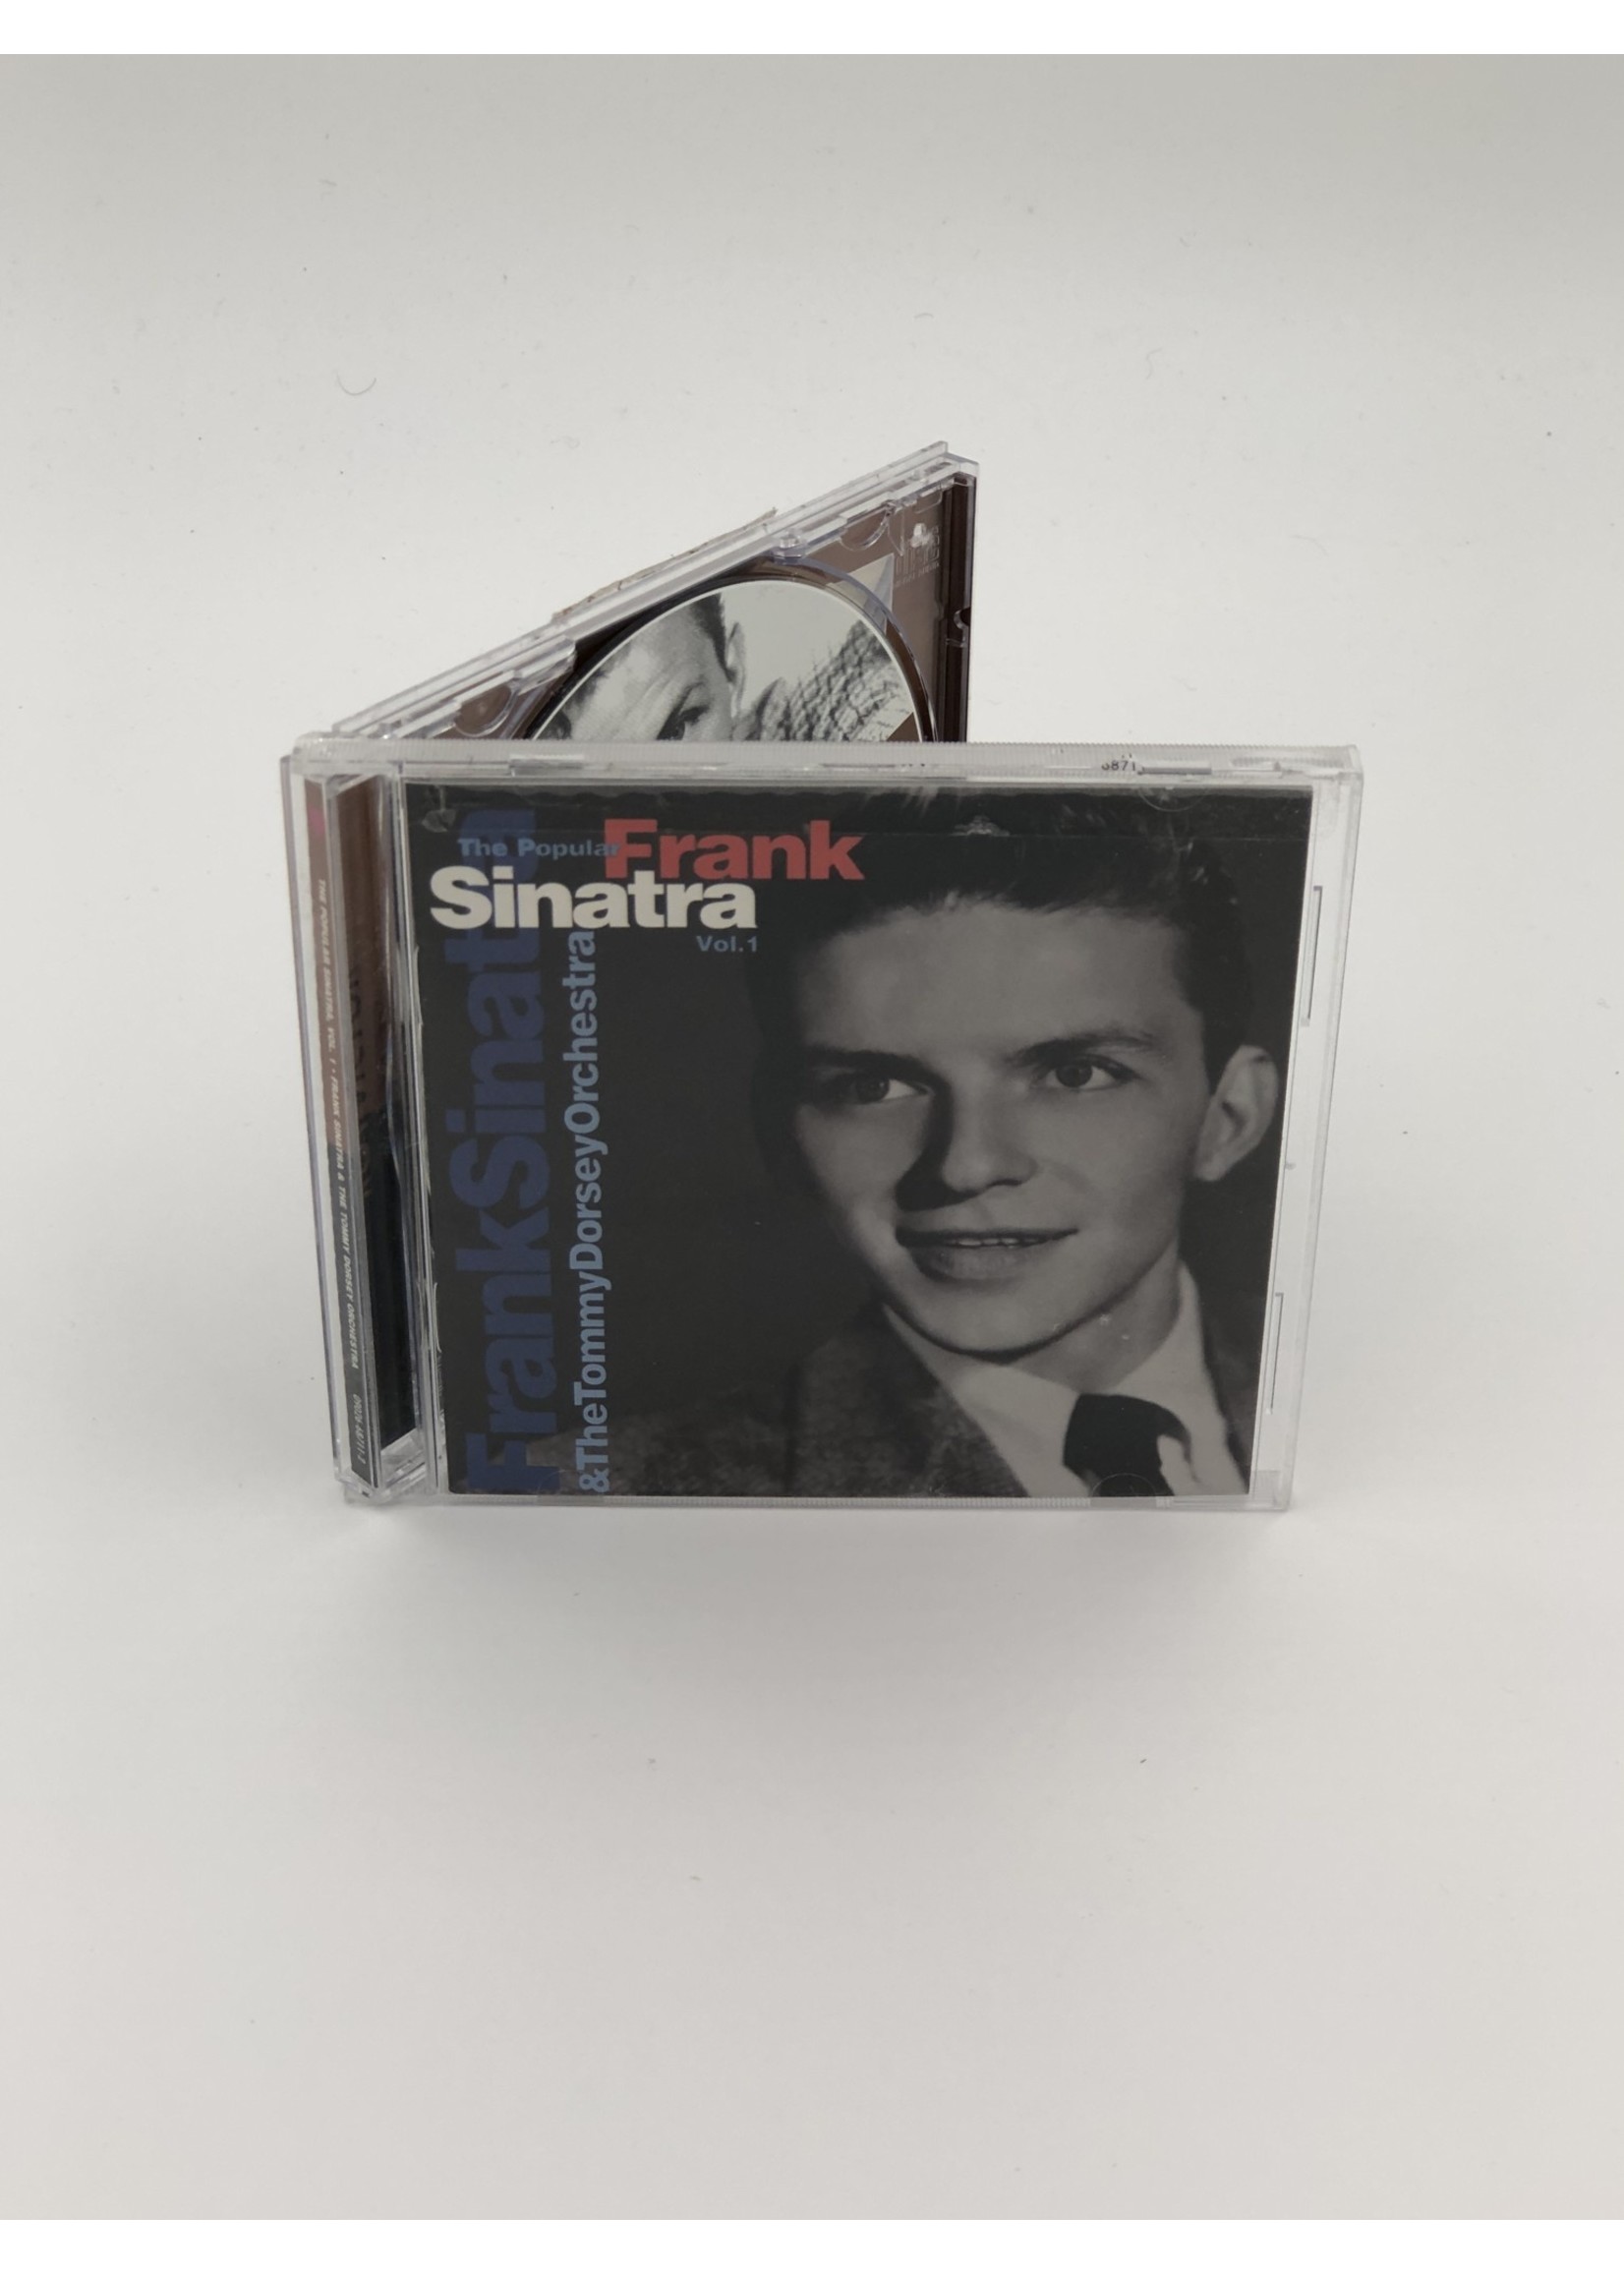 CD Frank Sinatra And The Tommy Dorsey Orchestra The Popular Sinatra Vol 1 CD